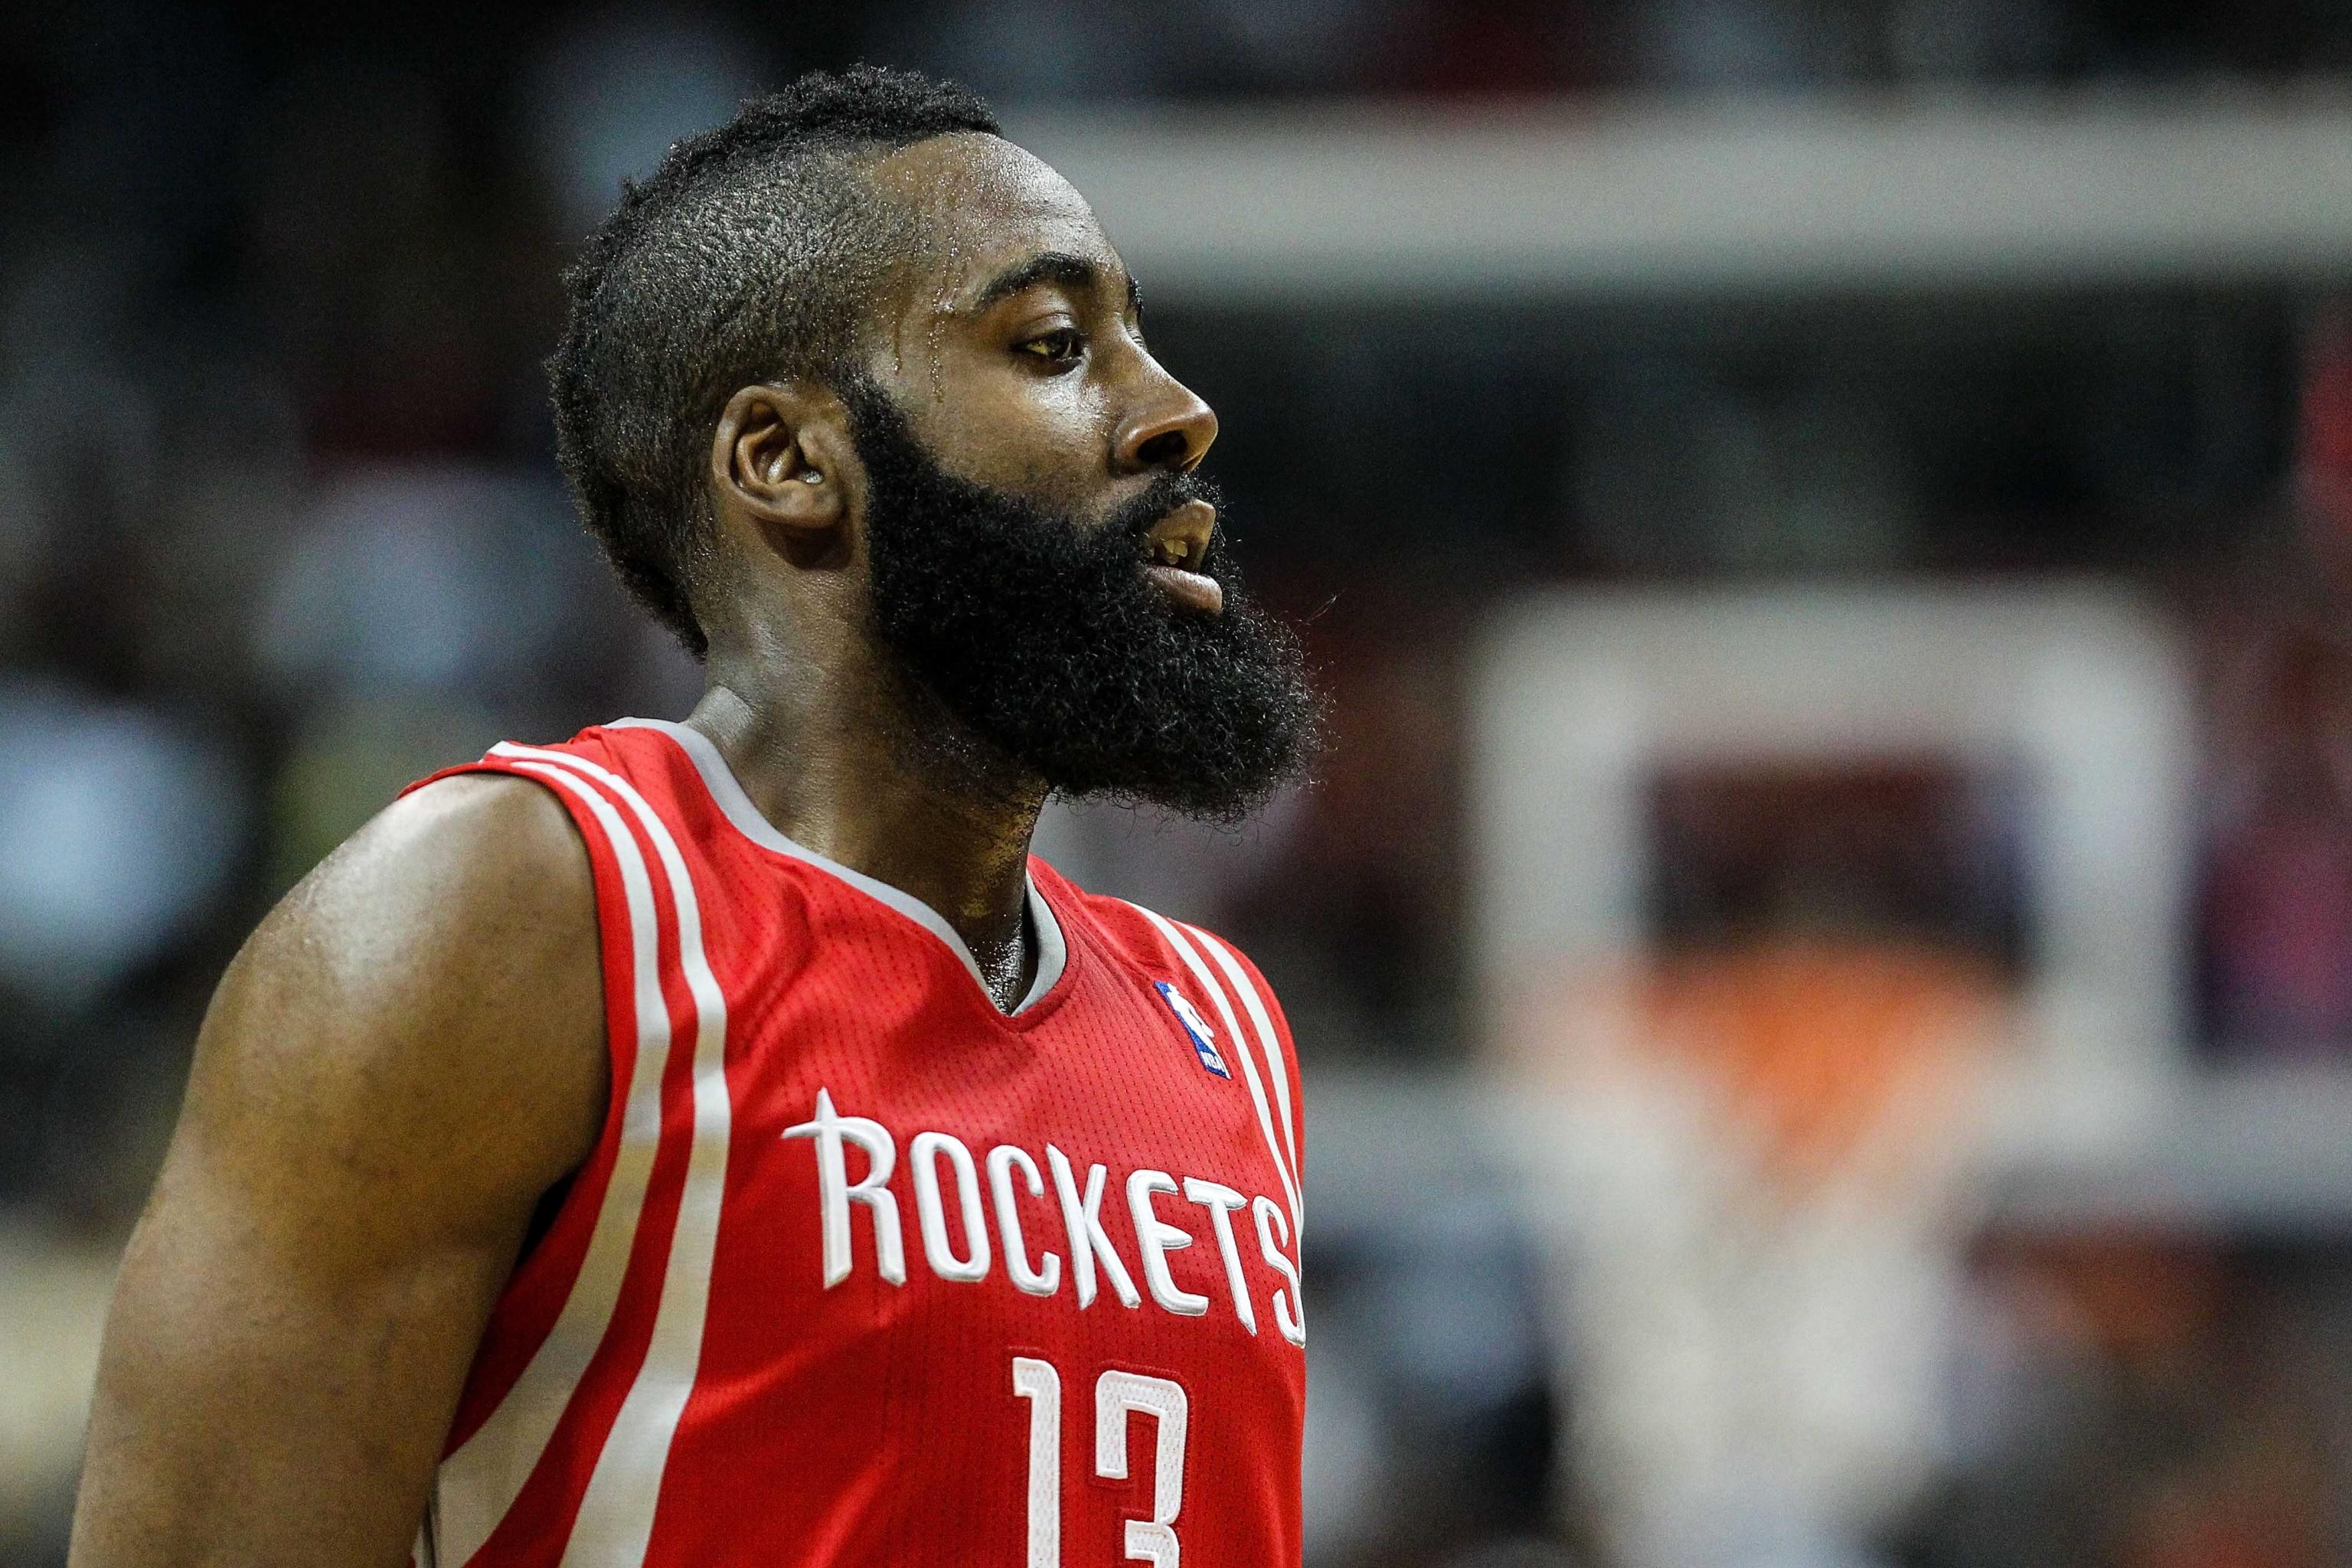 Houston Rockets: 5 things to watch against Oklahoma City